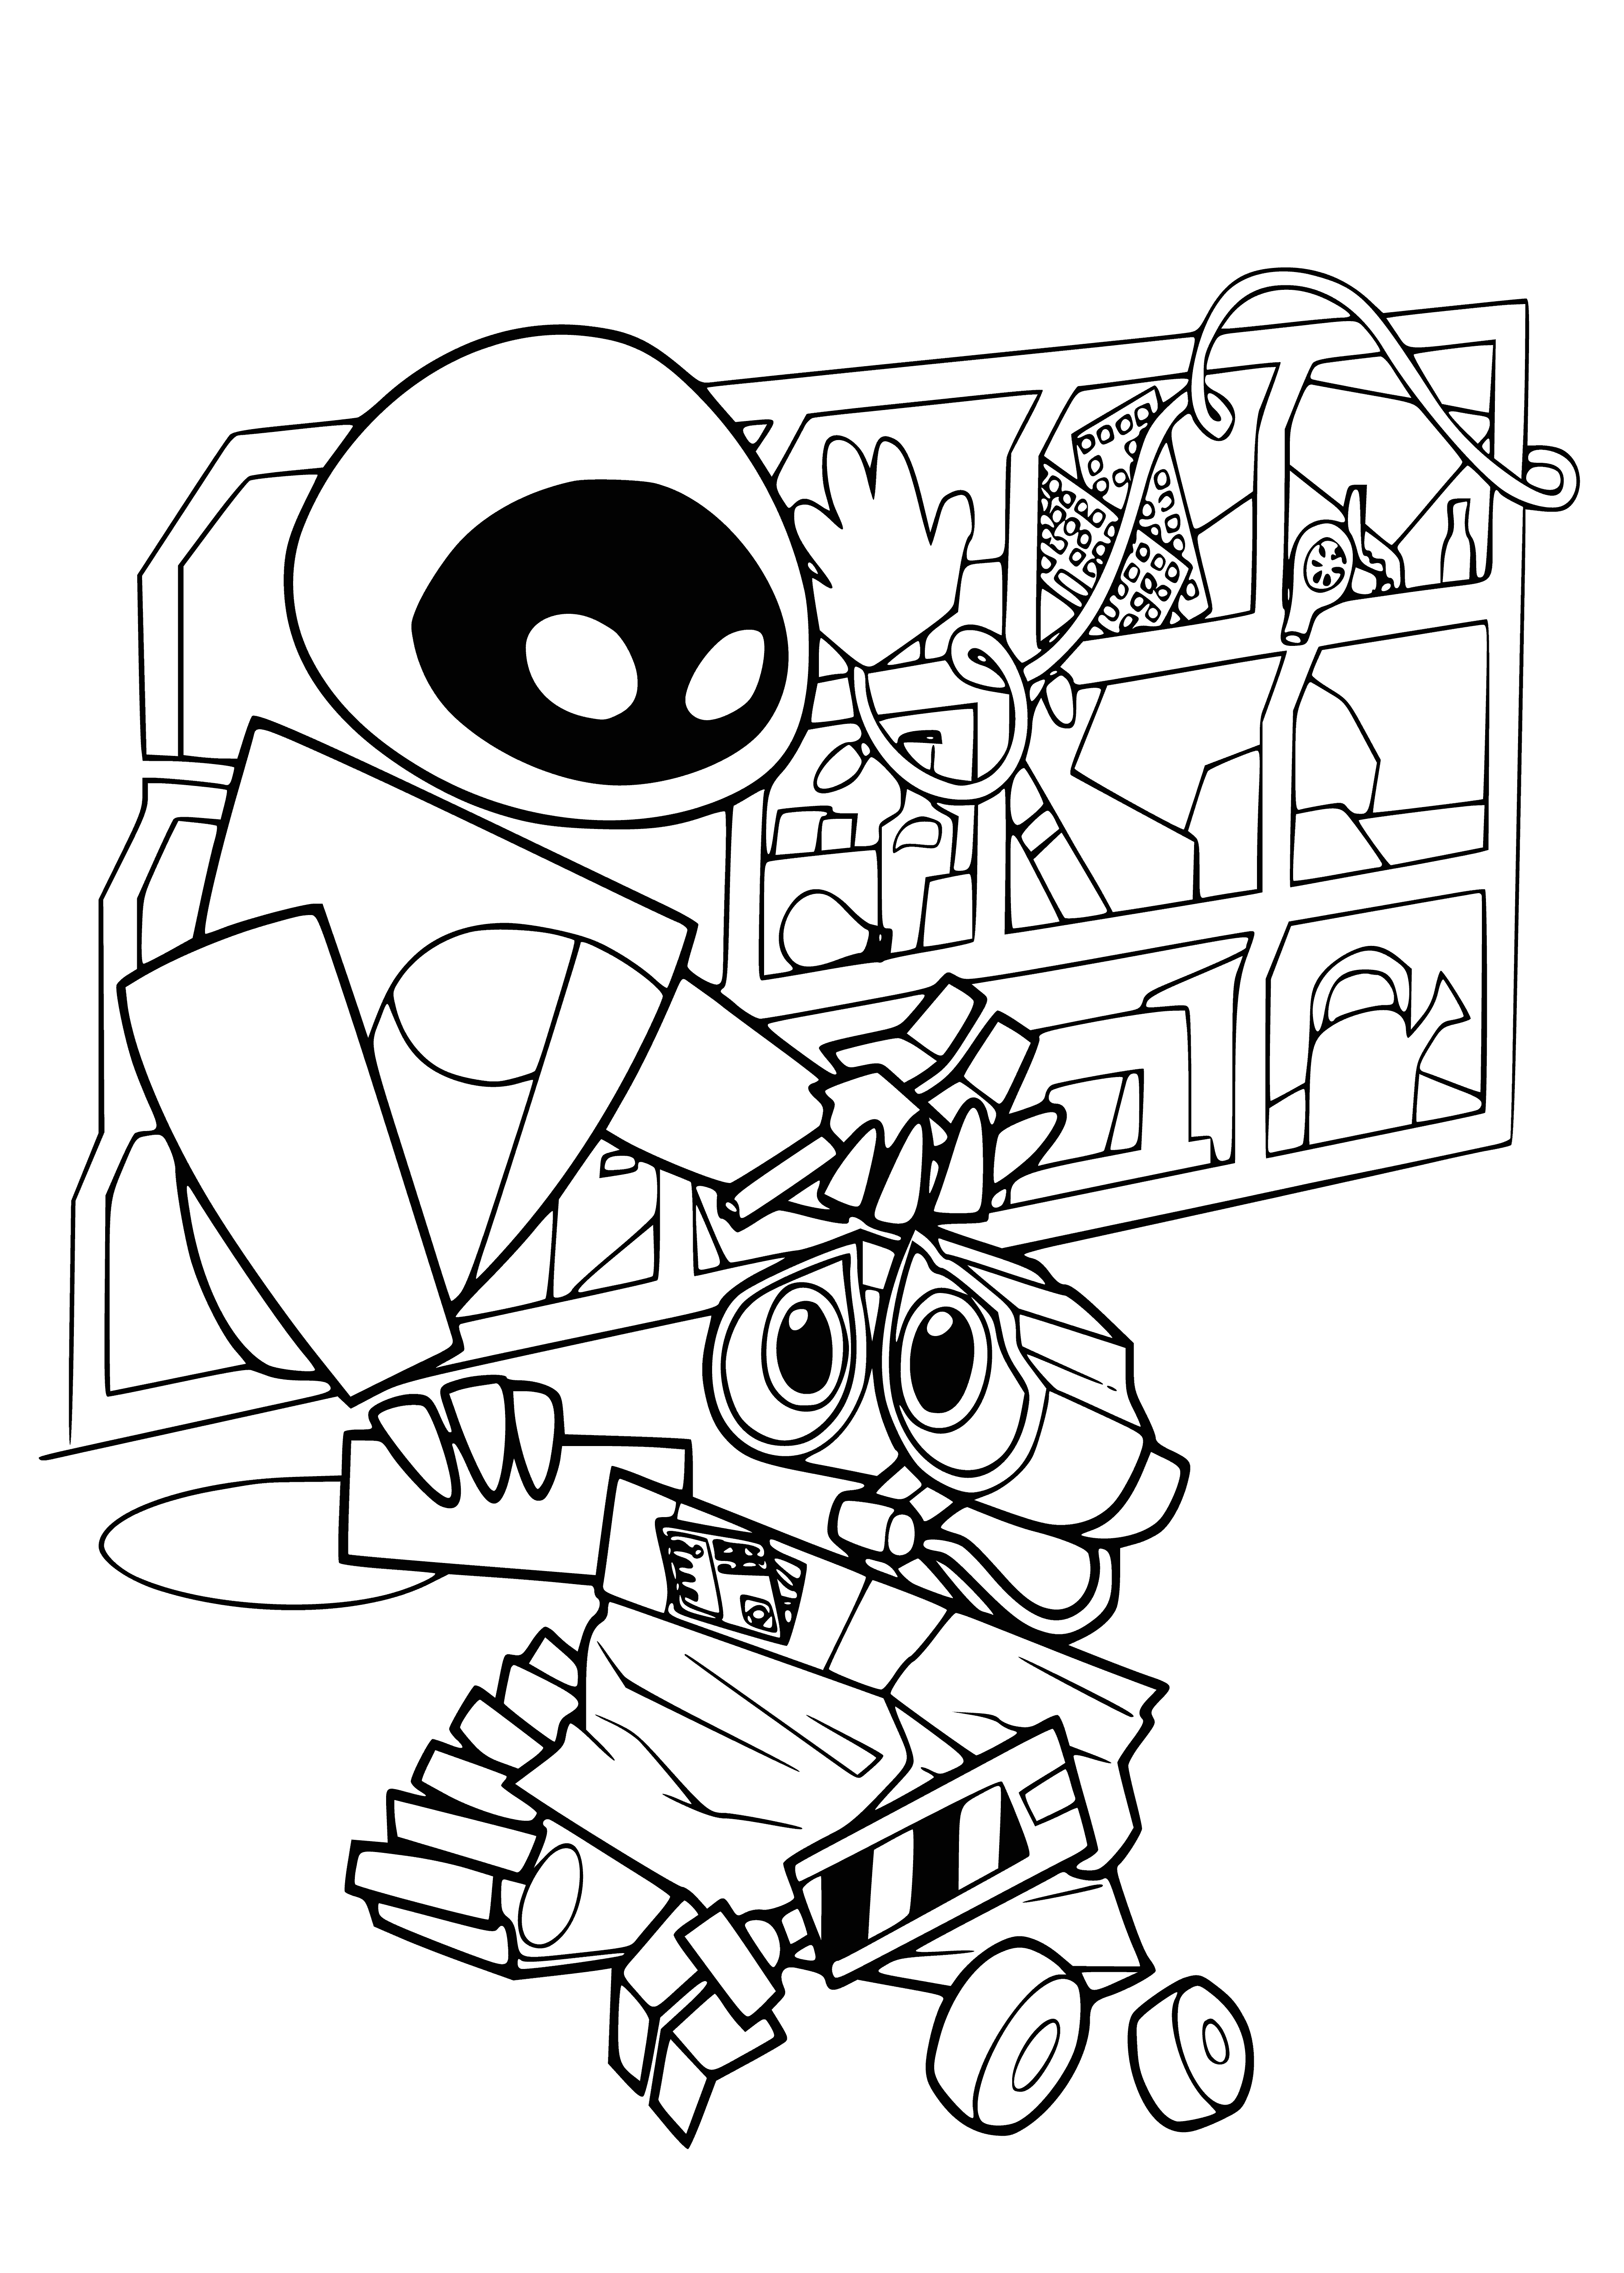 coloring page: Two robots stand on a planet, one white/blue, one green/yellow. #Robots